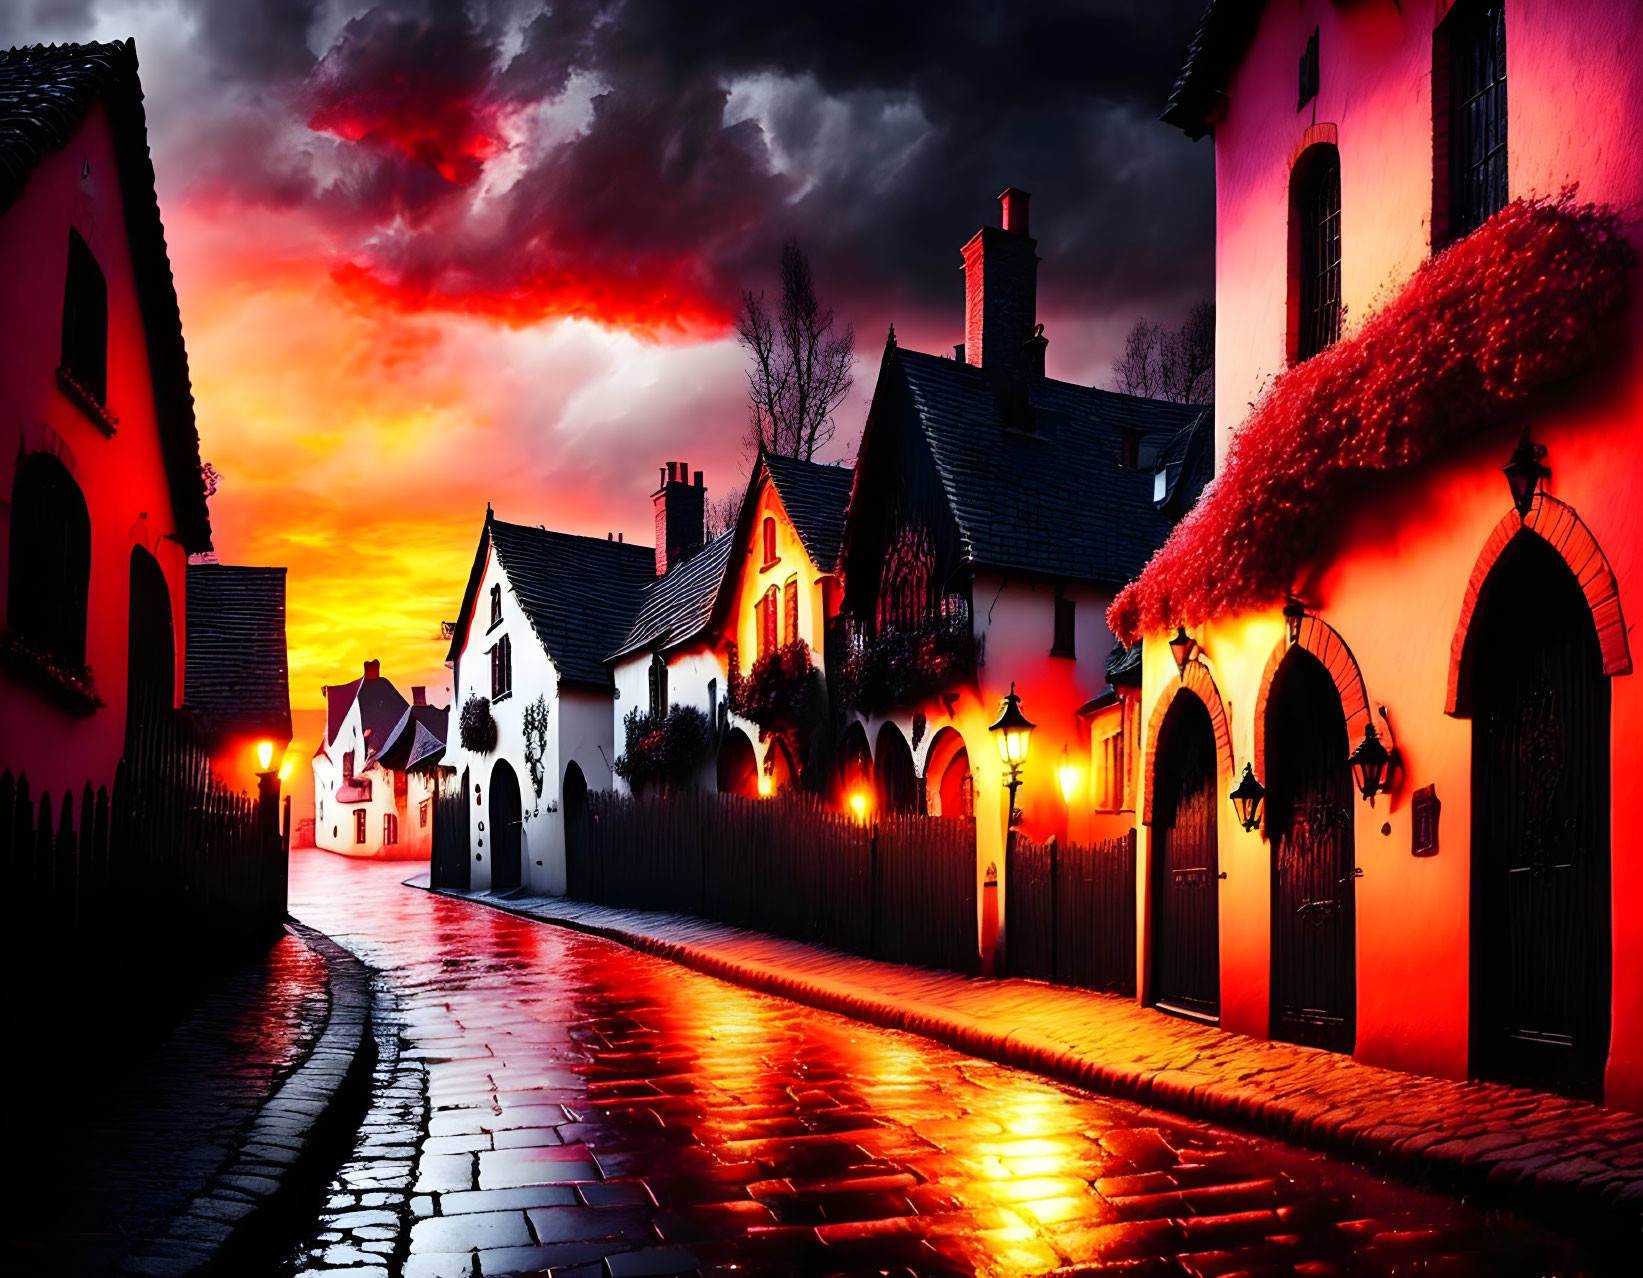 Gorgeous sunset over a medieval alley 